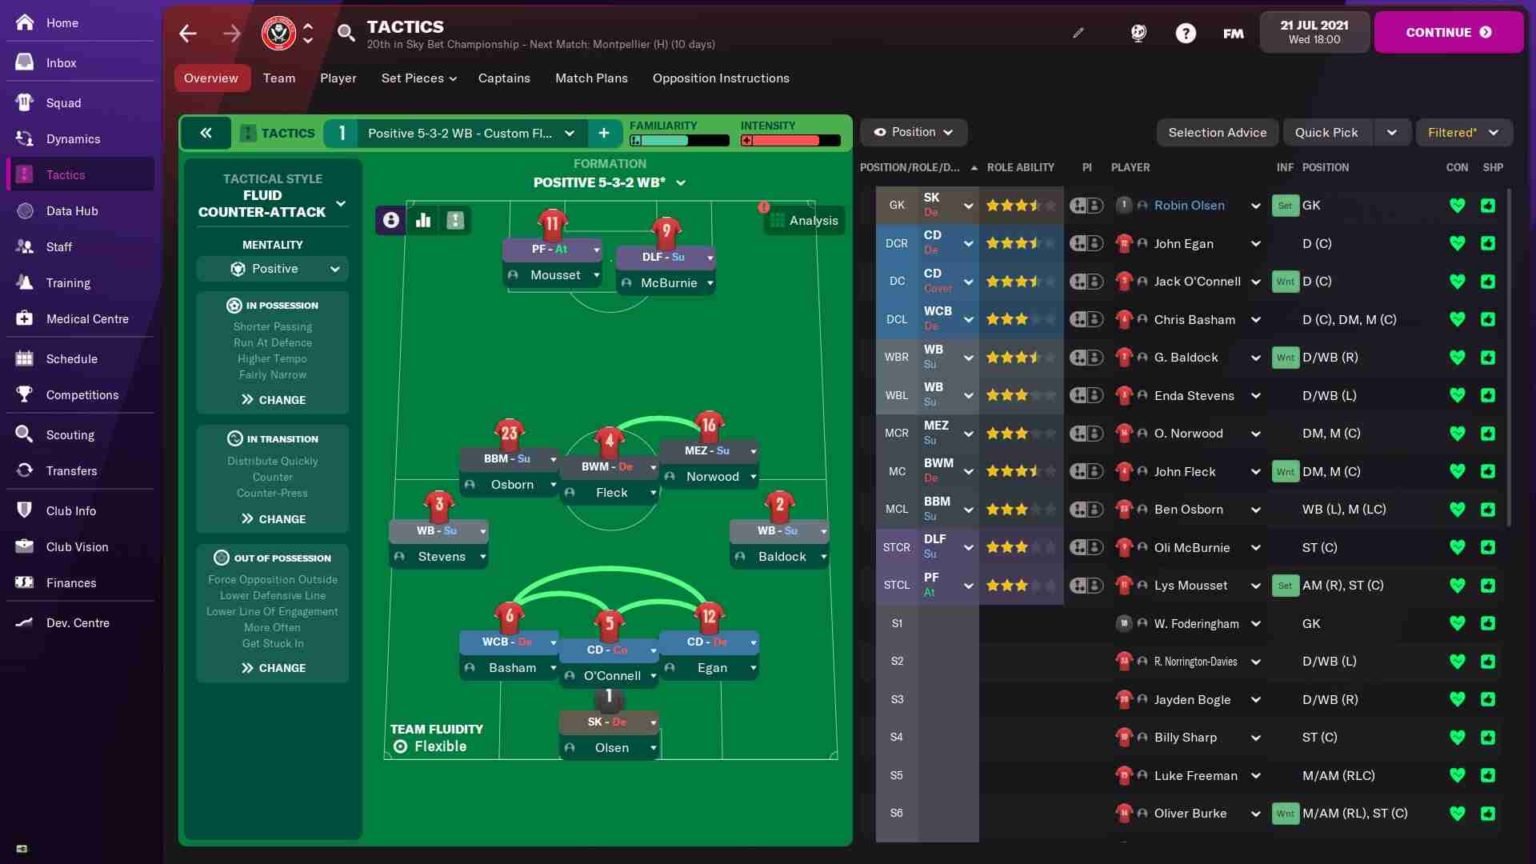 Football Manager 2023 Release Date, Trailer & more When is it coming